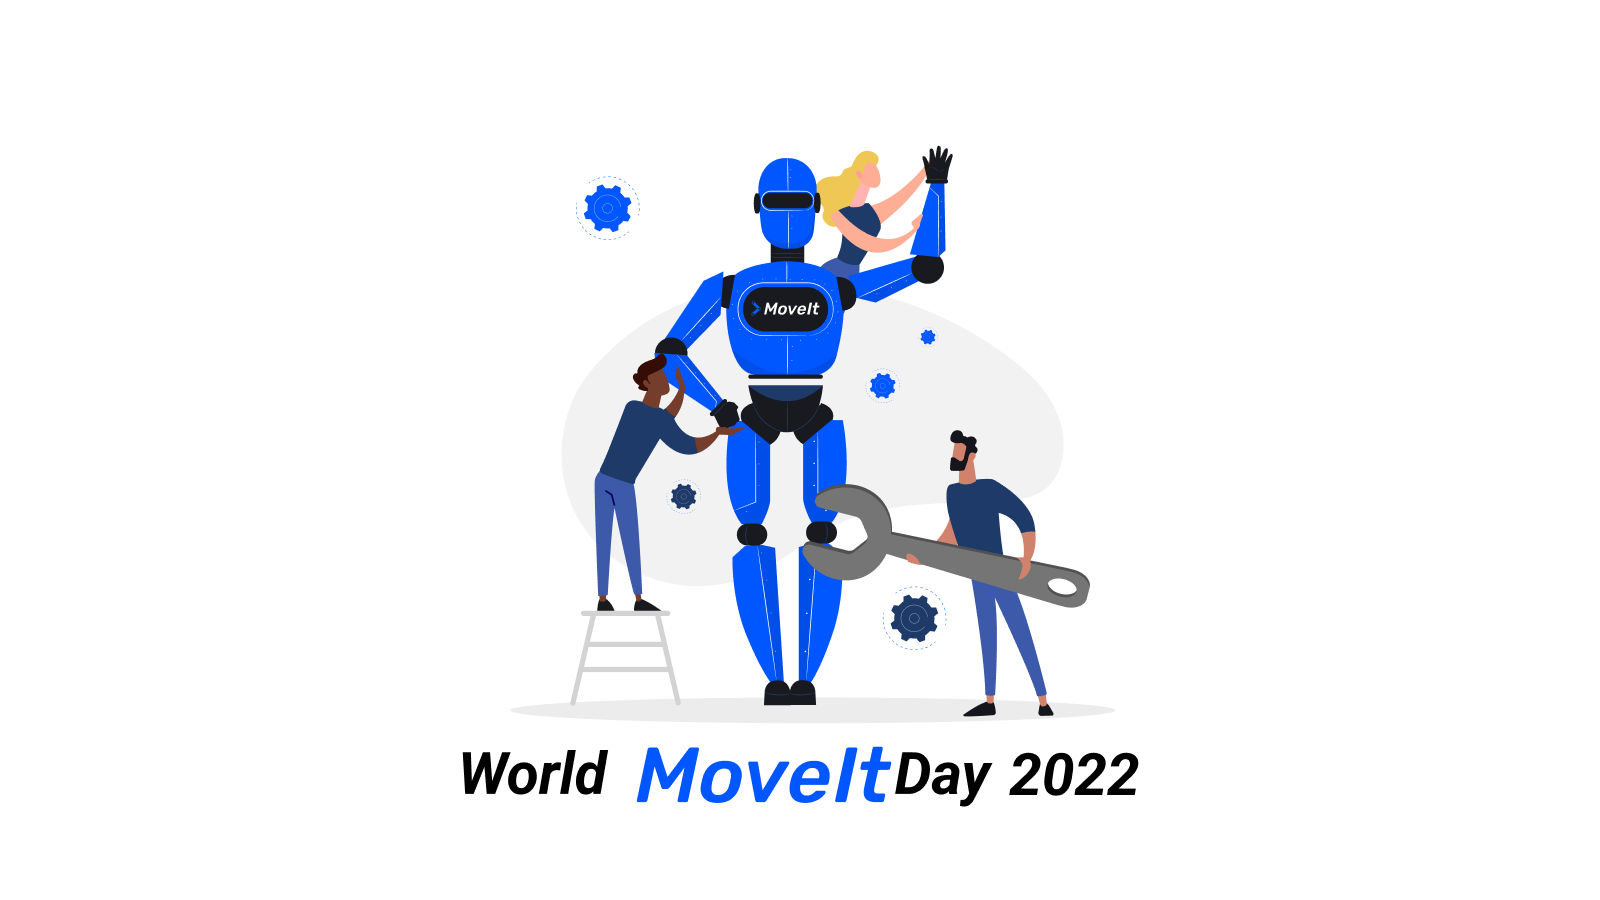 Hack with us on World MoveIt Day 2022!